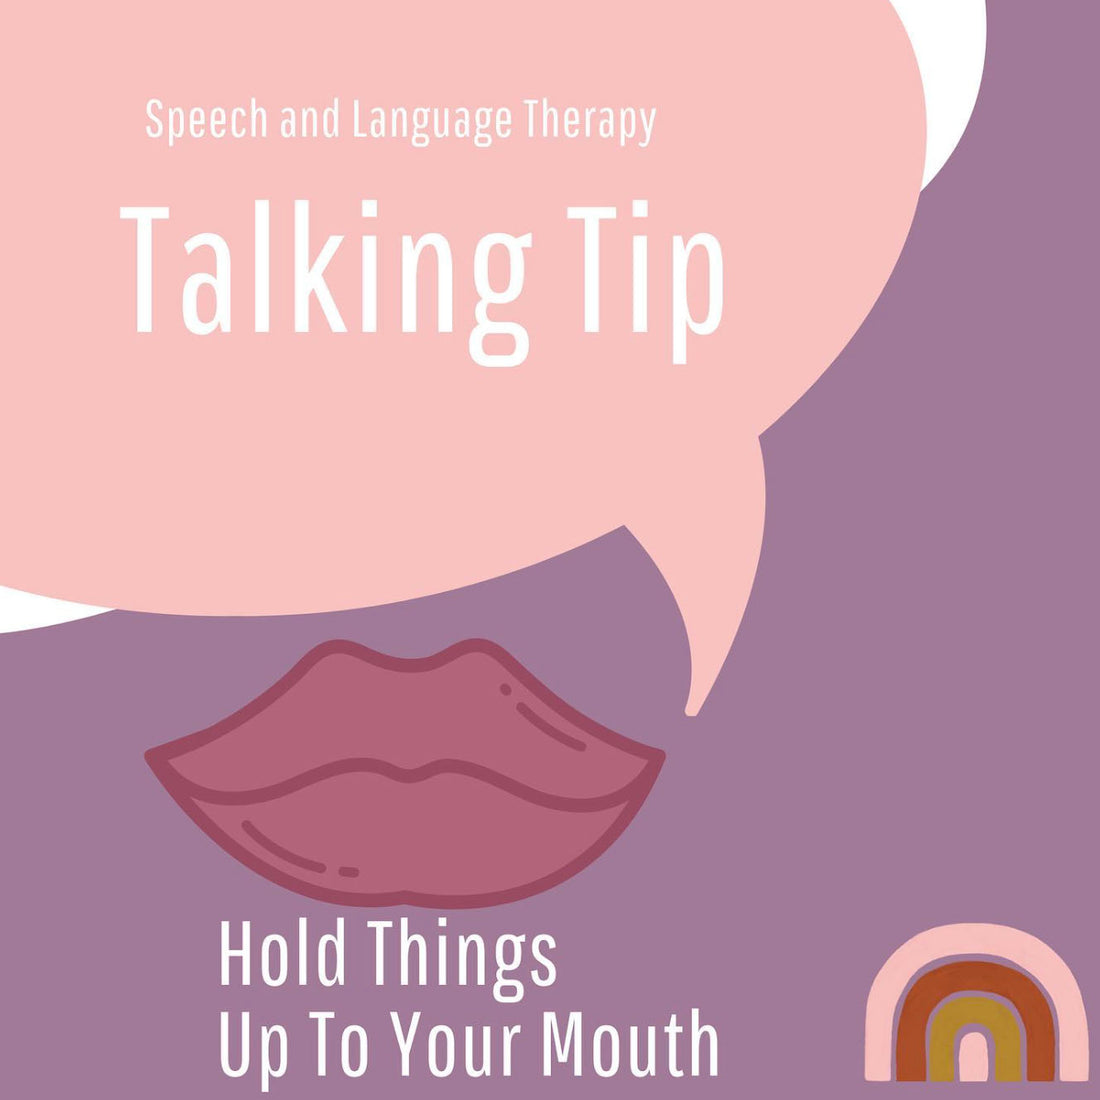 Talking Tip: Hold things up to your mouth